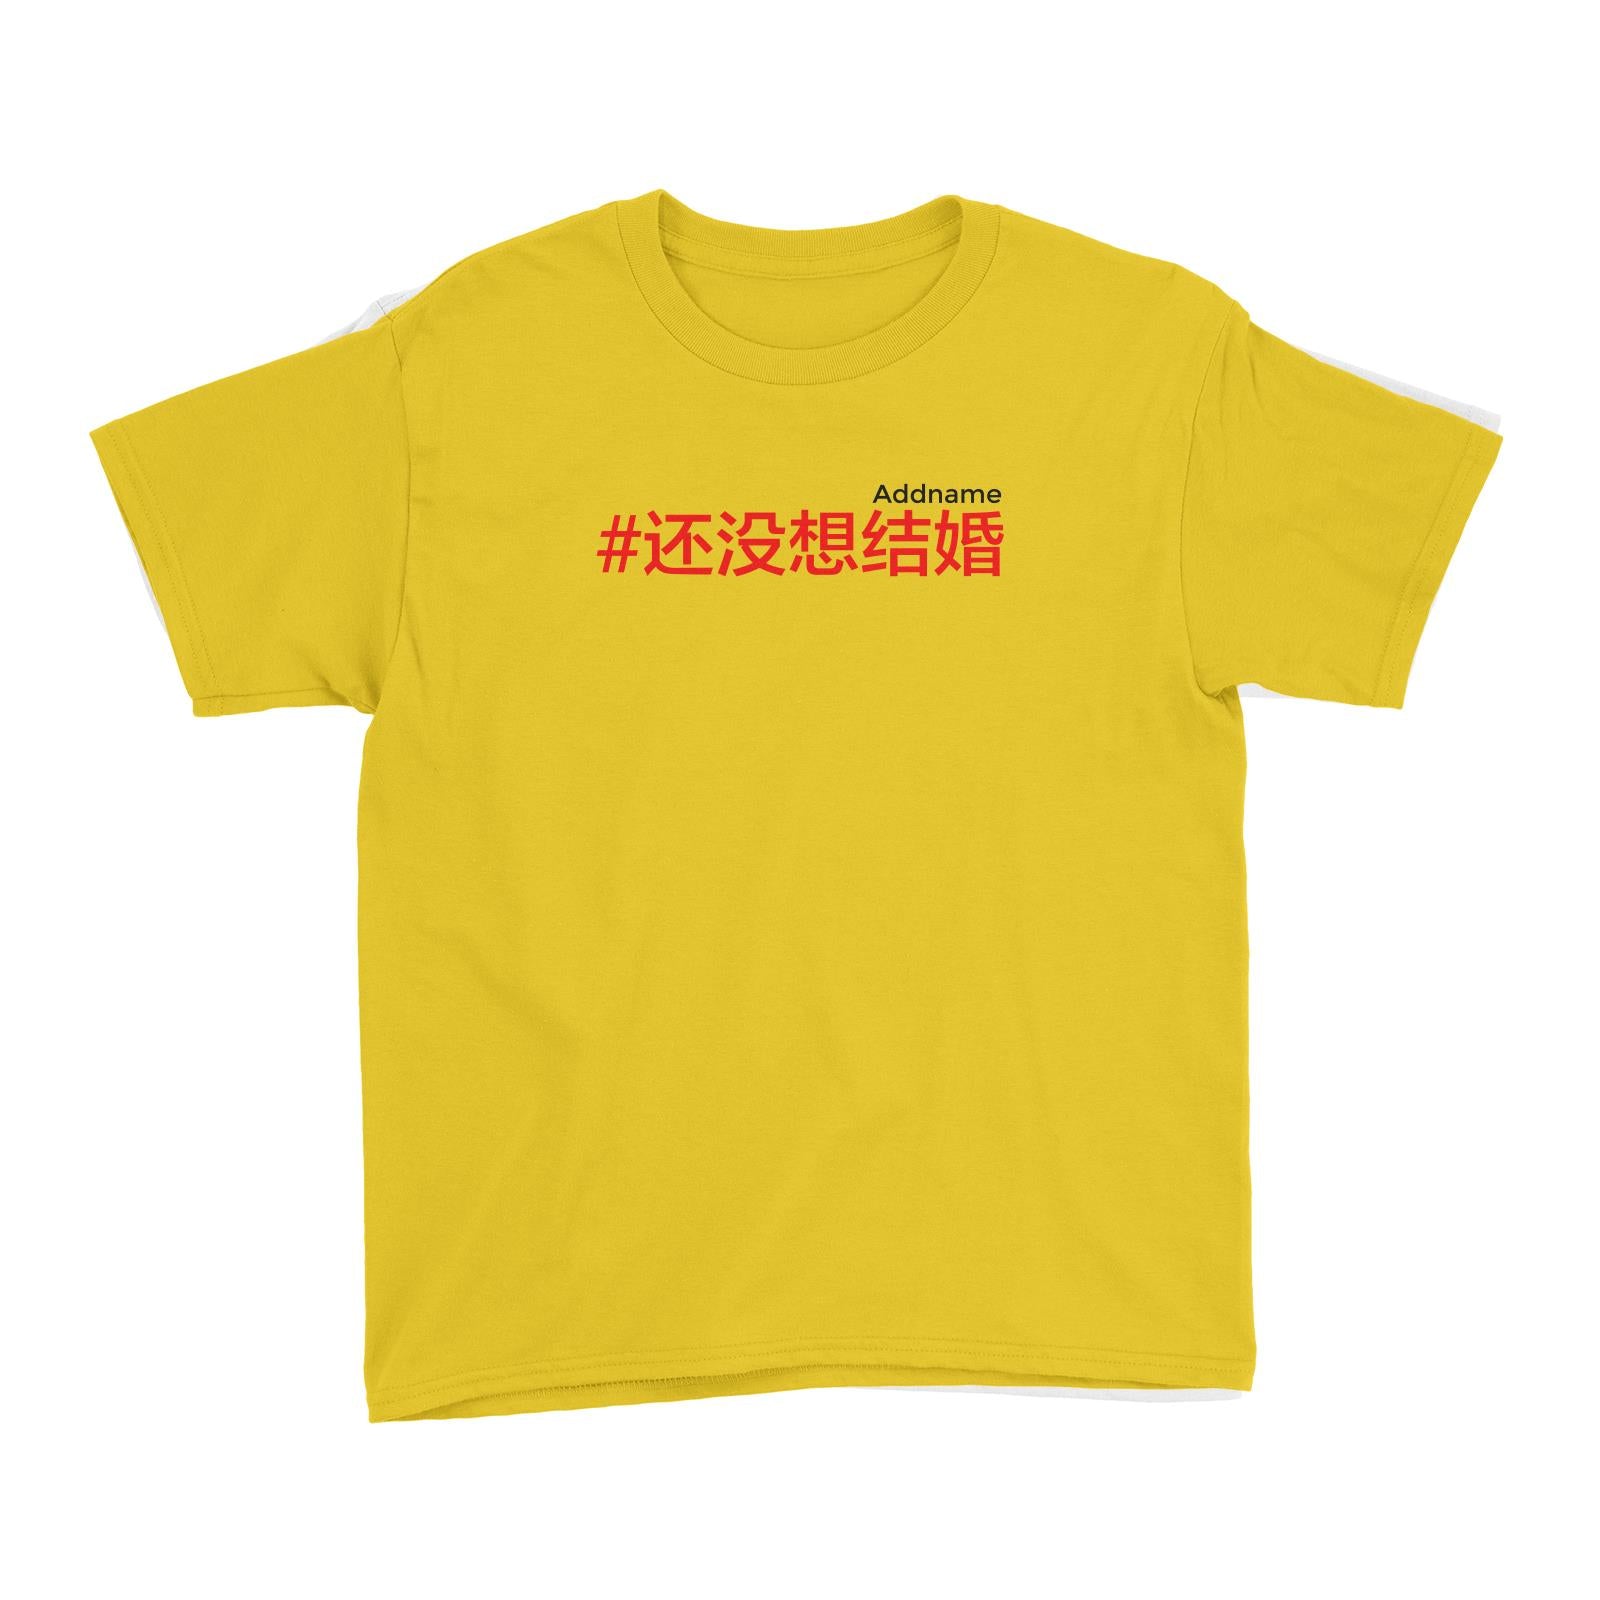 Chinese New Year Hashtag Still Not Getting Married Kid's T-Shirt  Personalizable Designs Funny